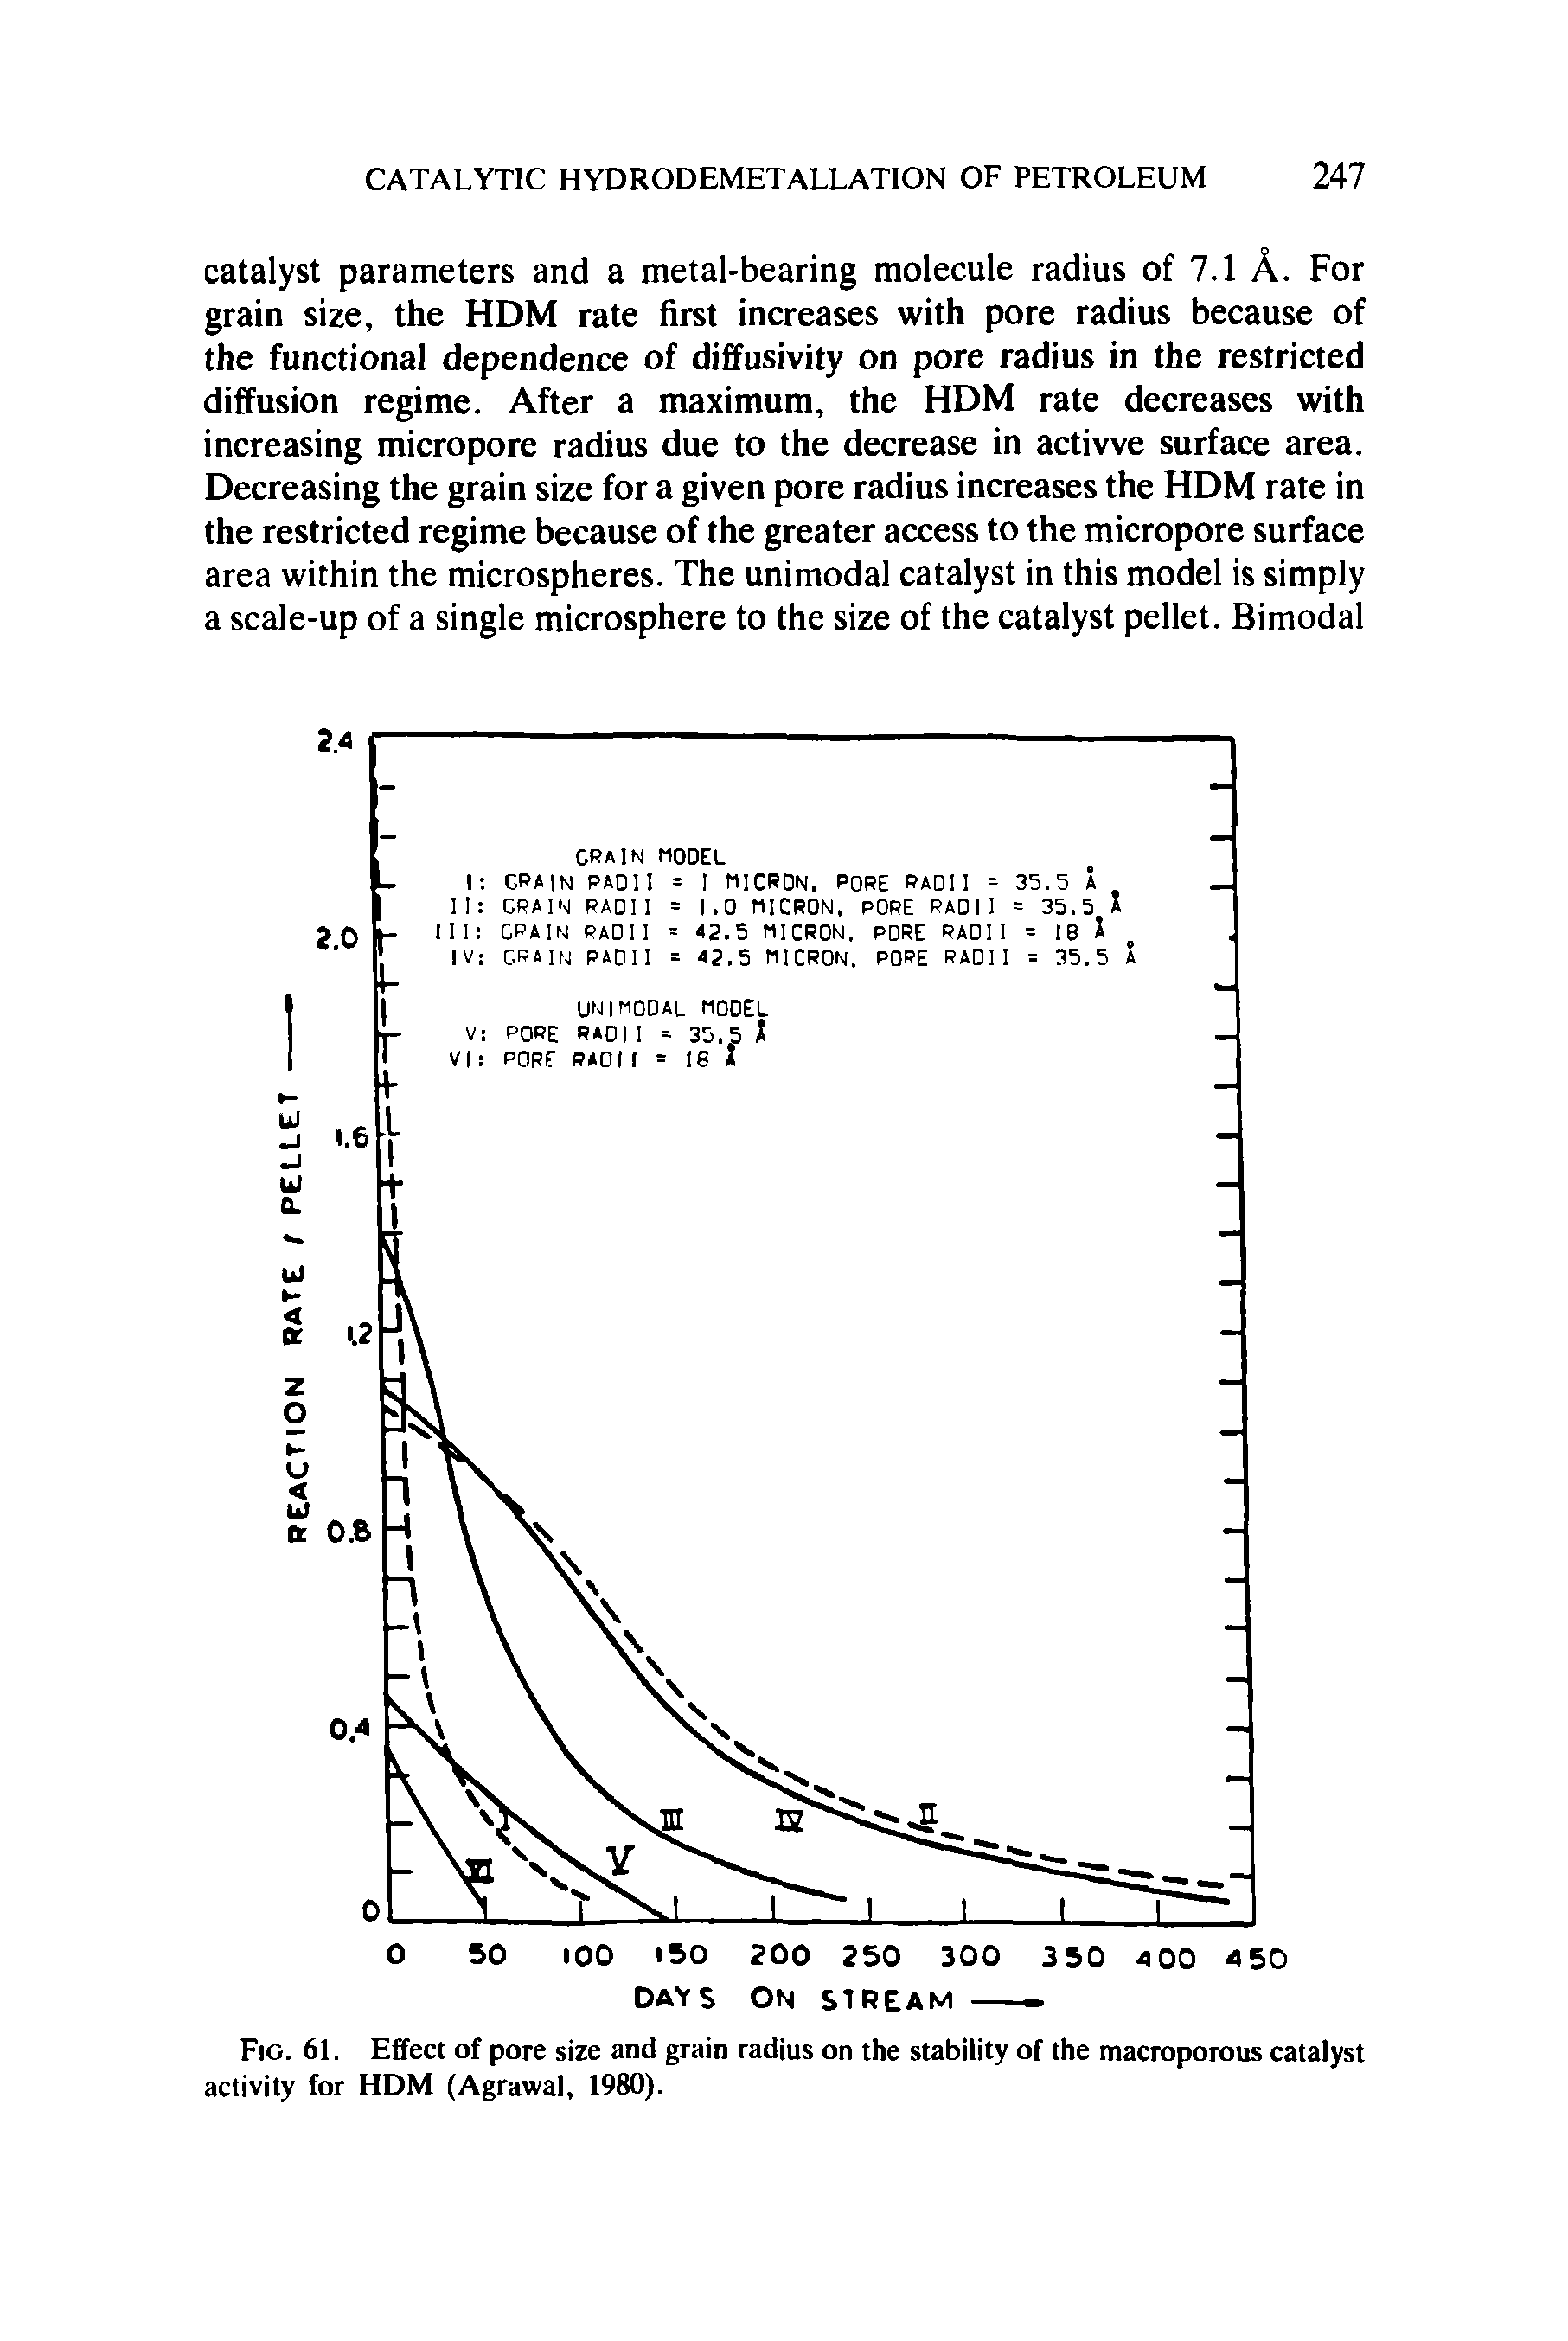 Fig. 61. Effect of pore size and grain radius on the stability of the macroporous catalyst activity for HDM (Agrawal, 1980).